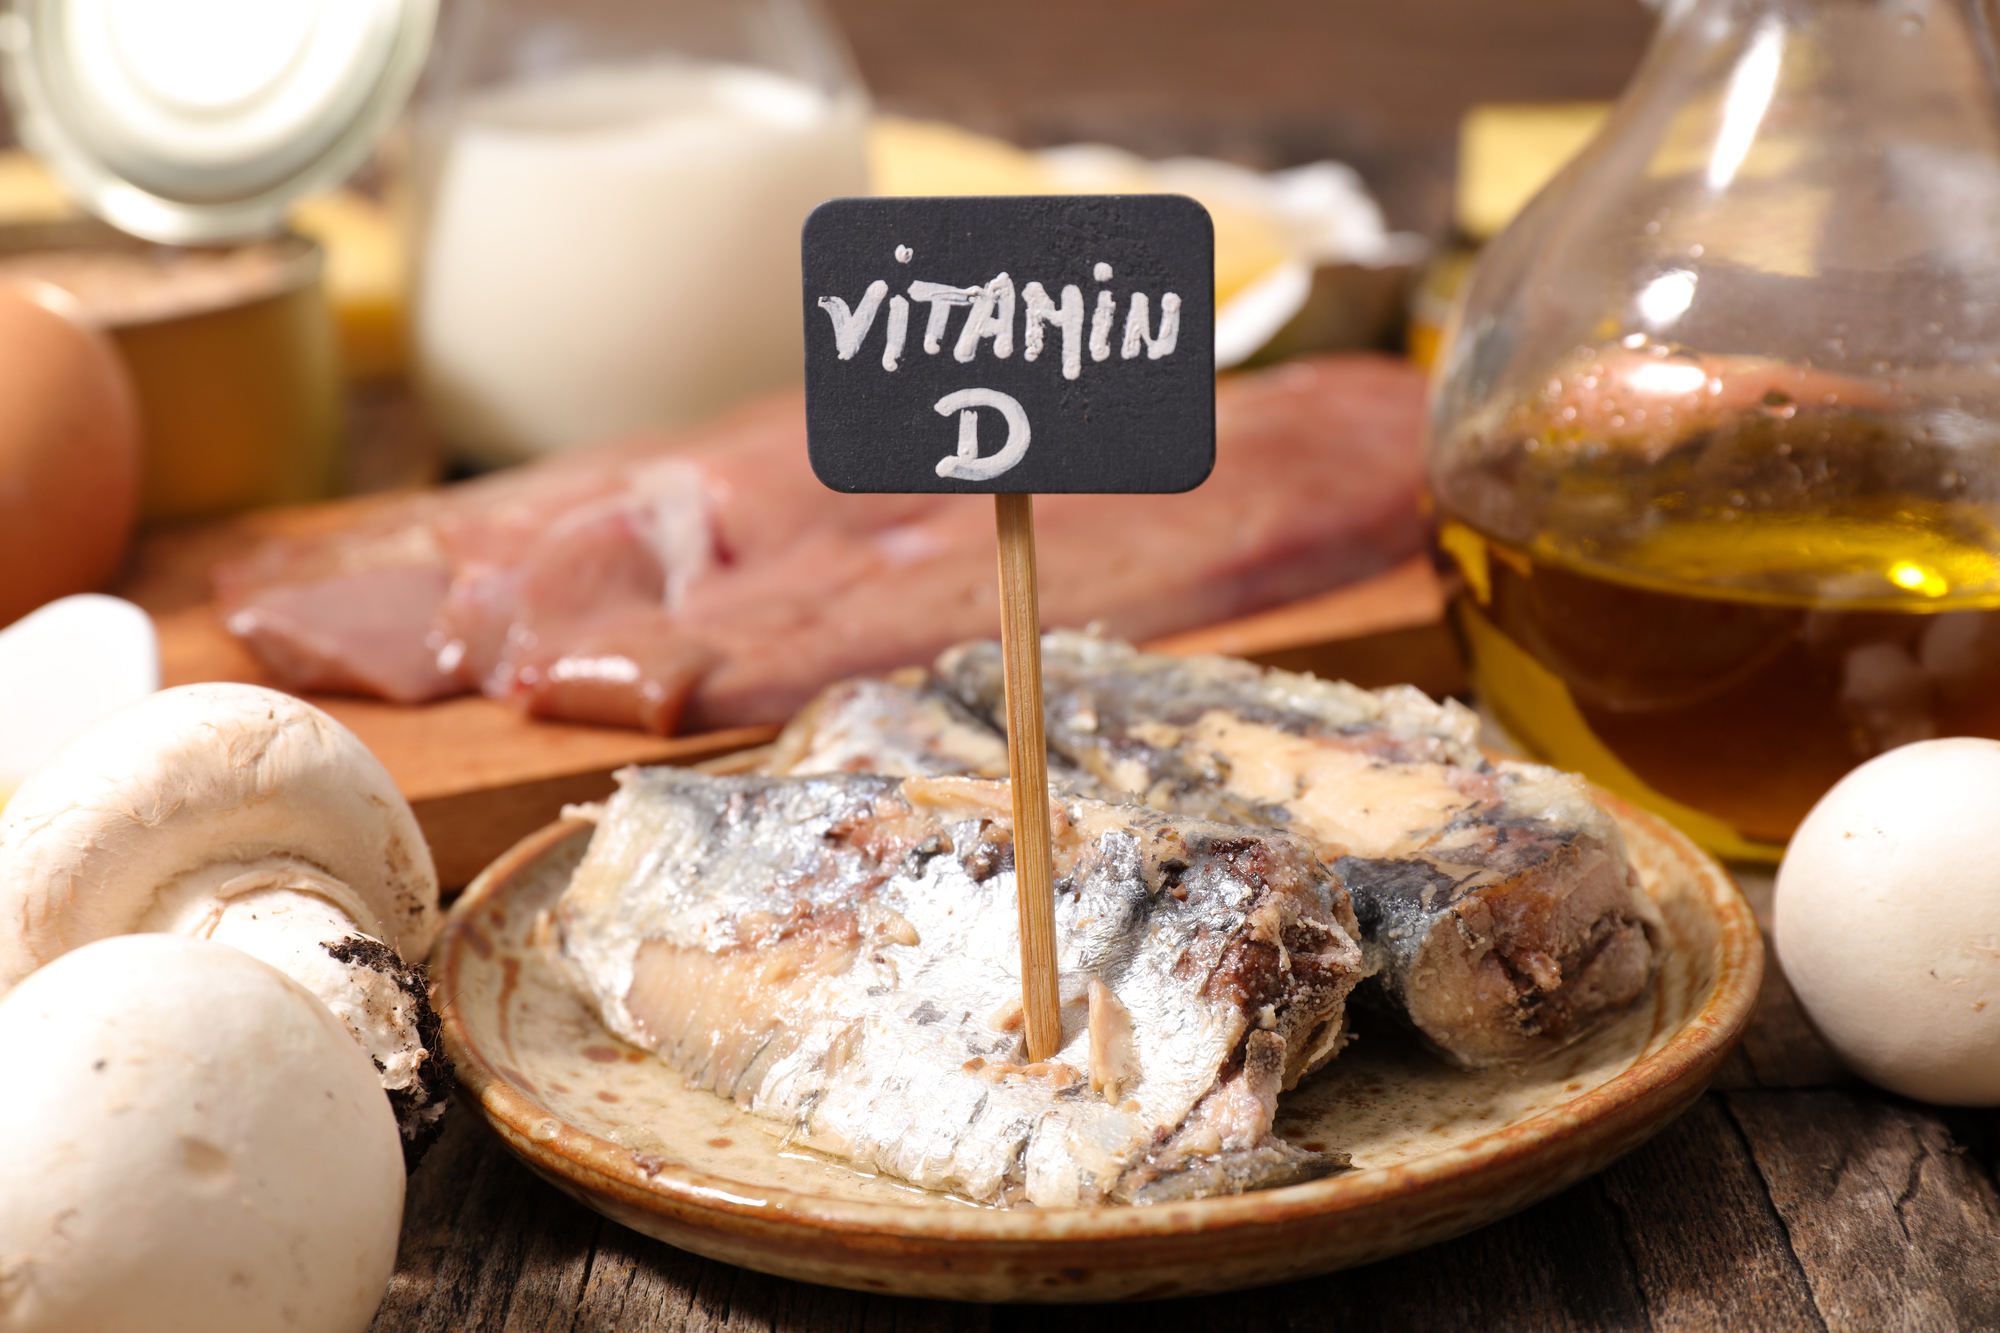 Food sources of vitamin D